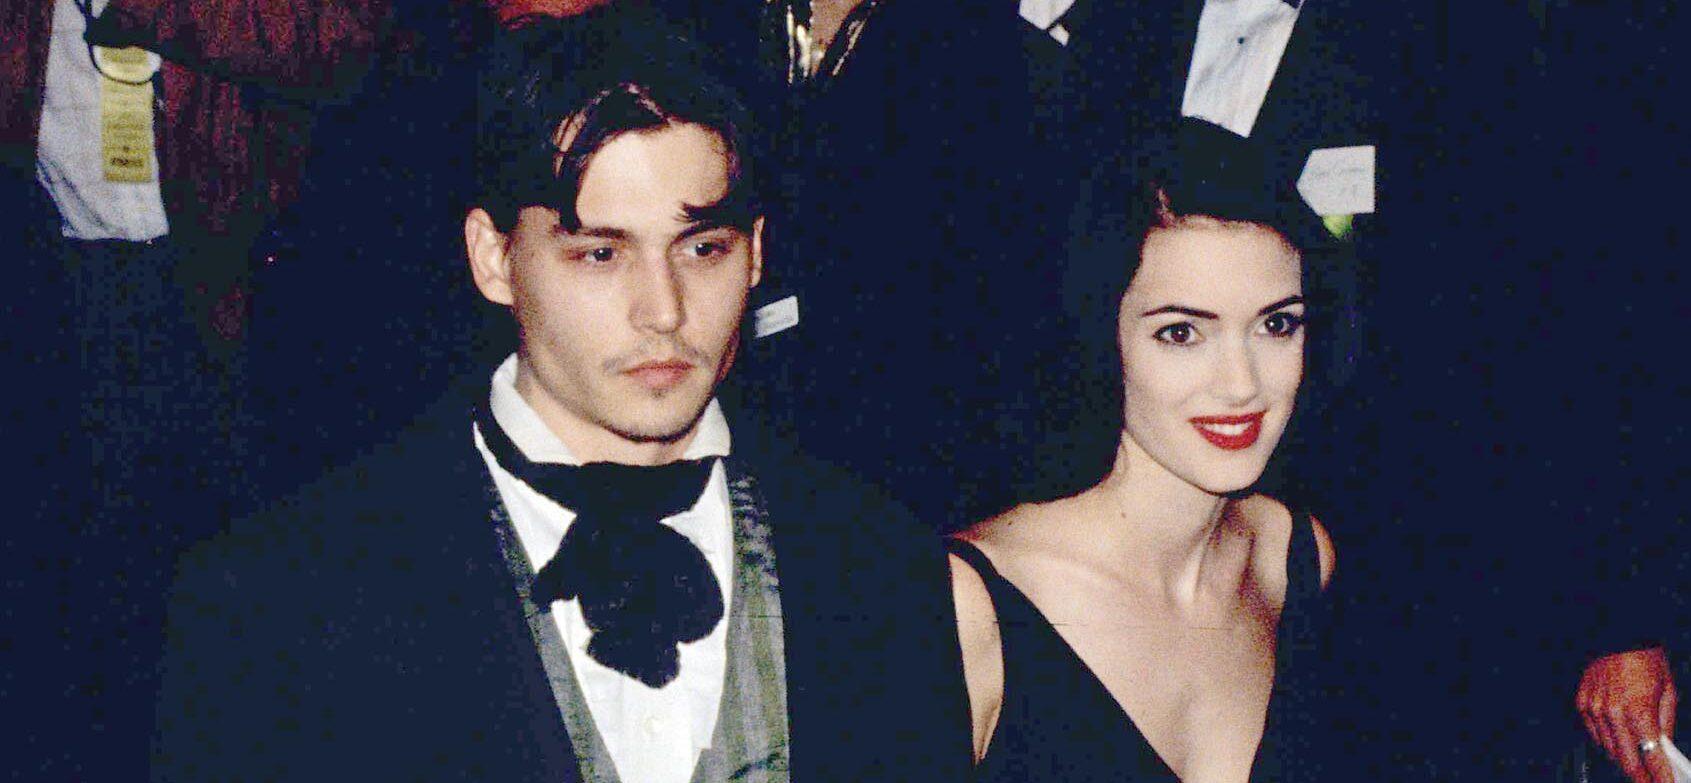 ©1991 RAMEY PHOTO 310-828-3445 JOHNNY DEPP AND WINONA RYDER AT THE GOLDEN GLOBES.